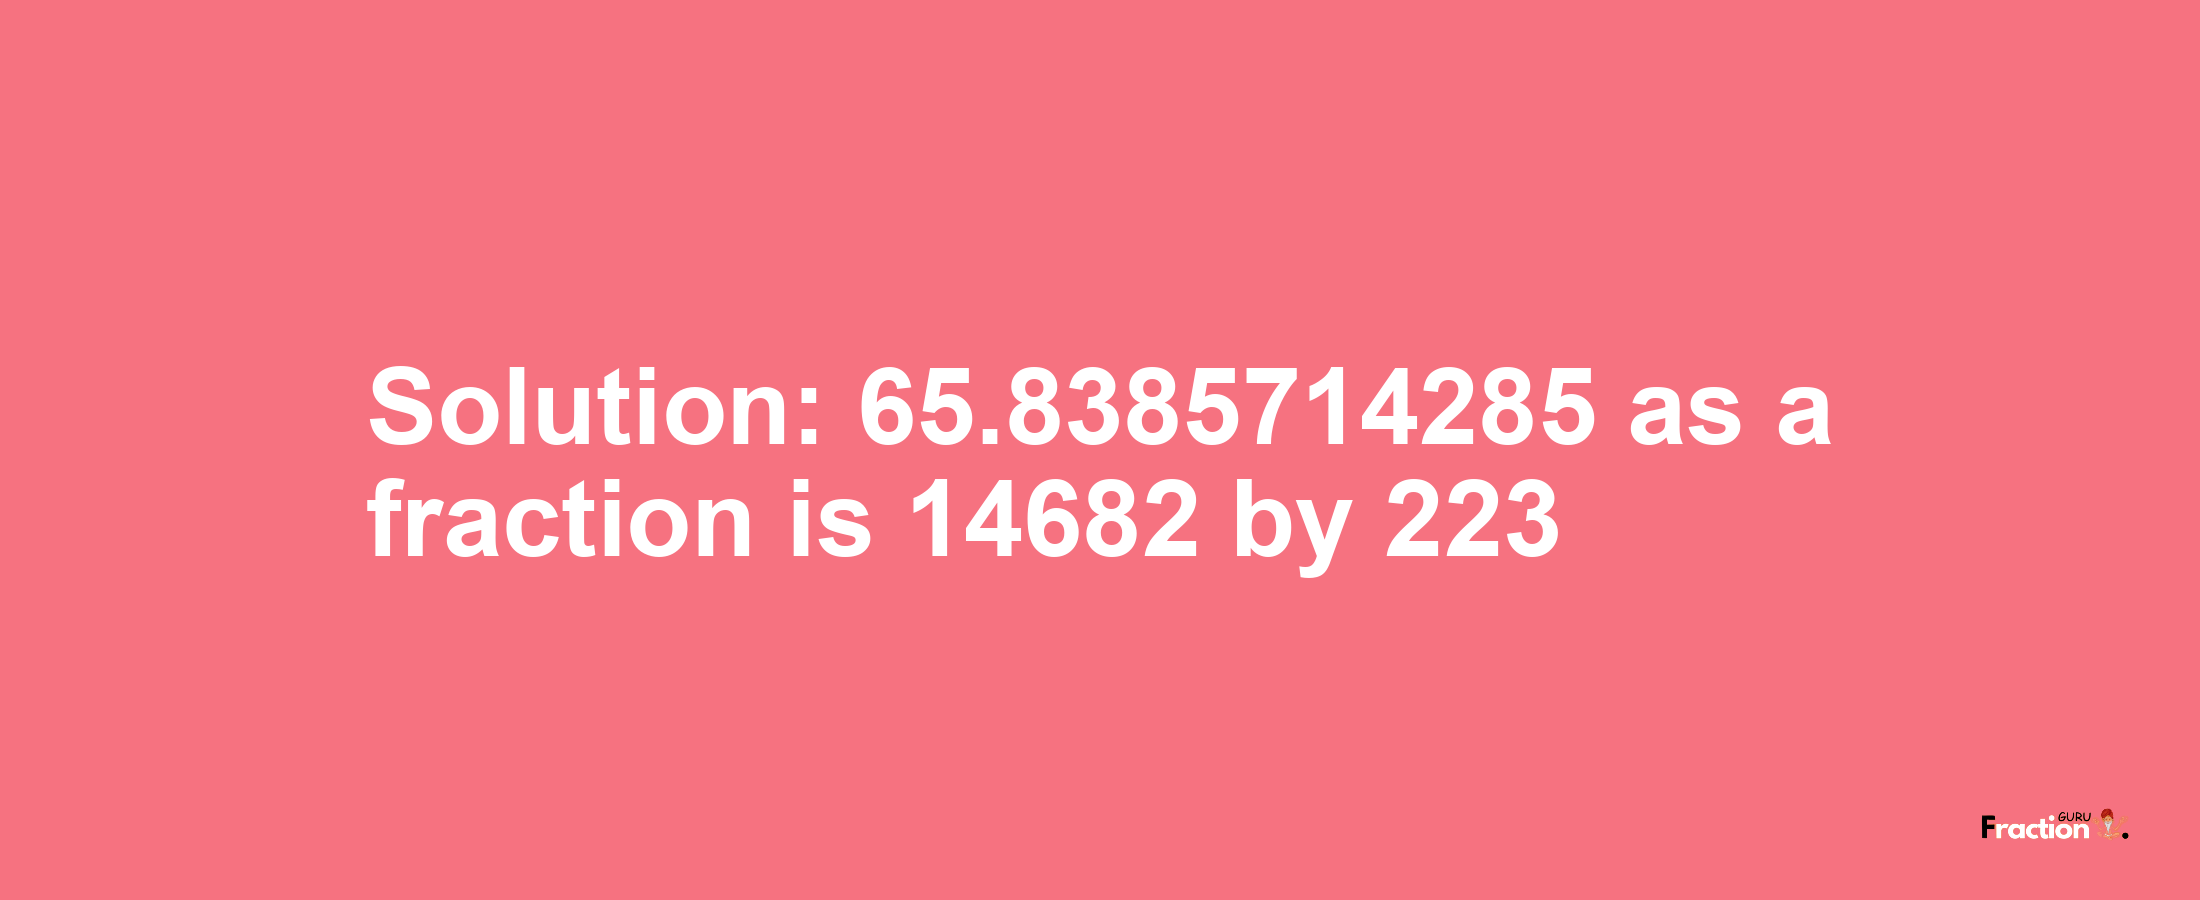 Solution:65.8385714285 as a fraction is 14682/223